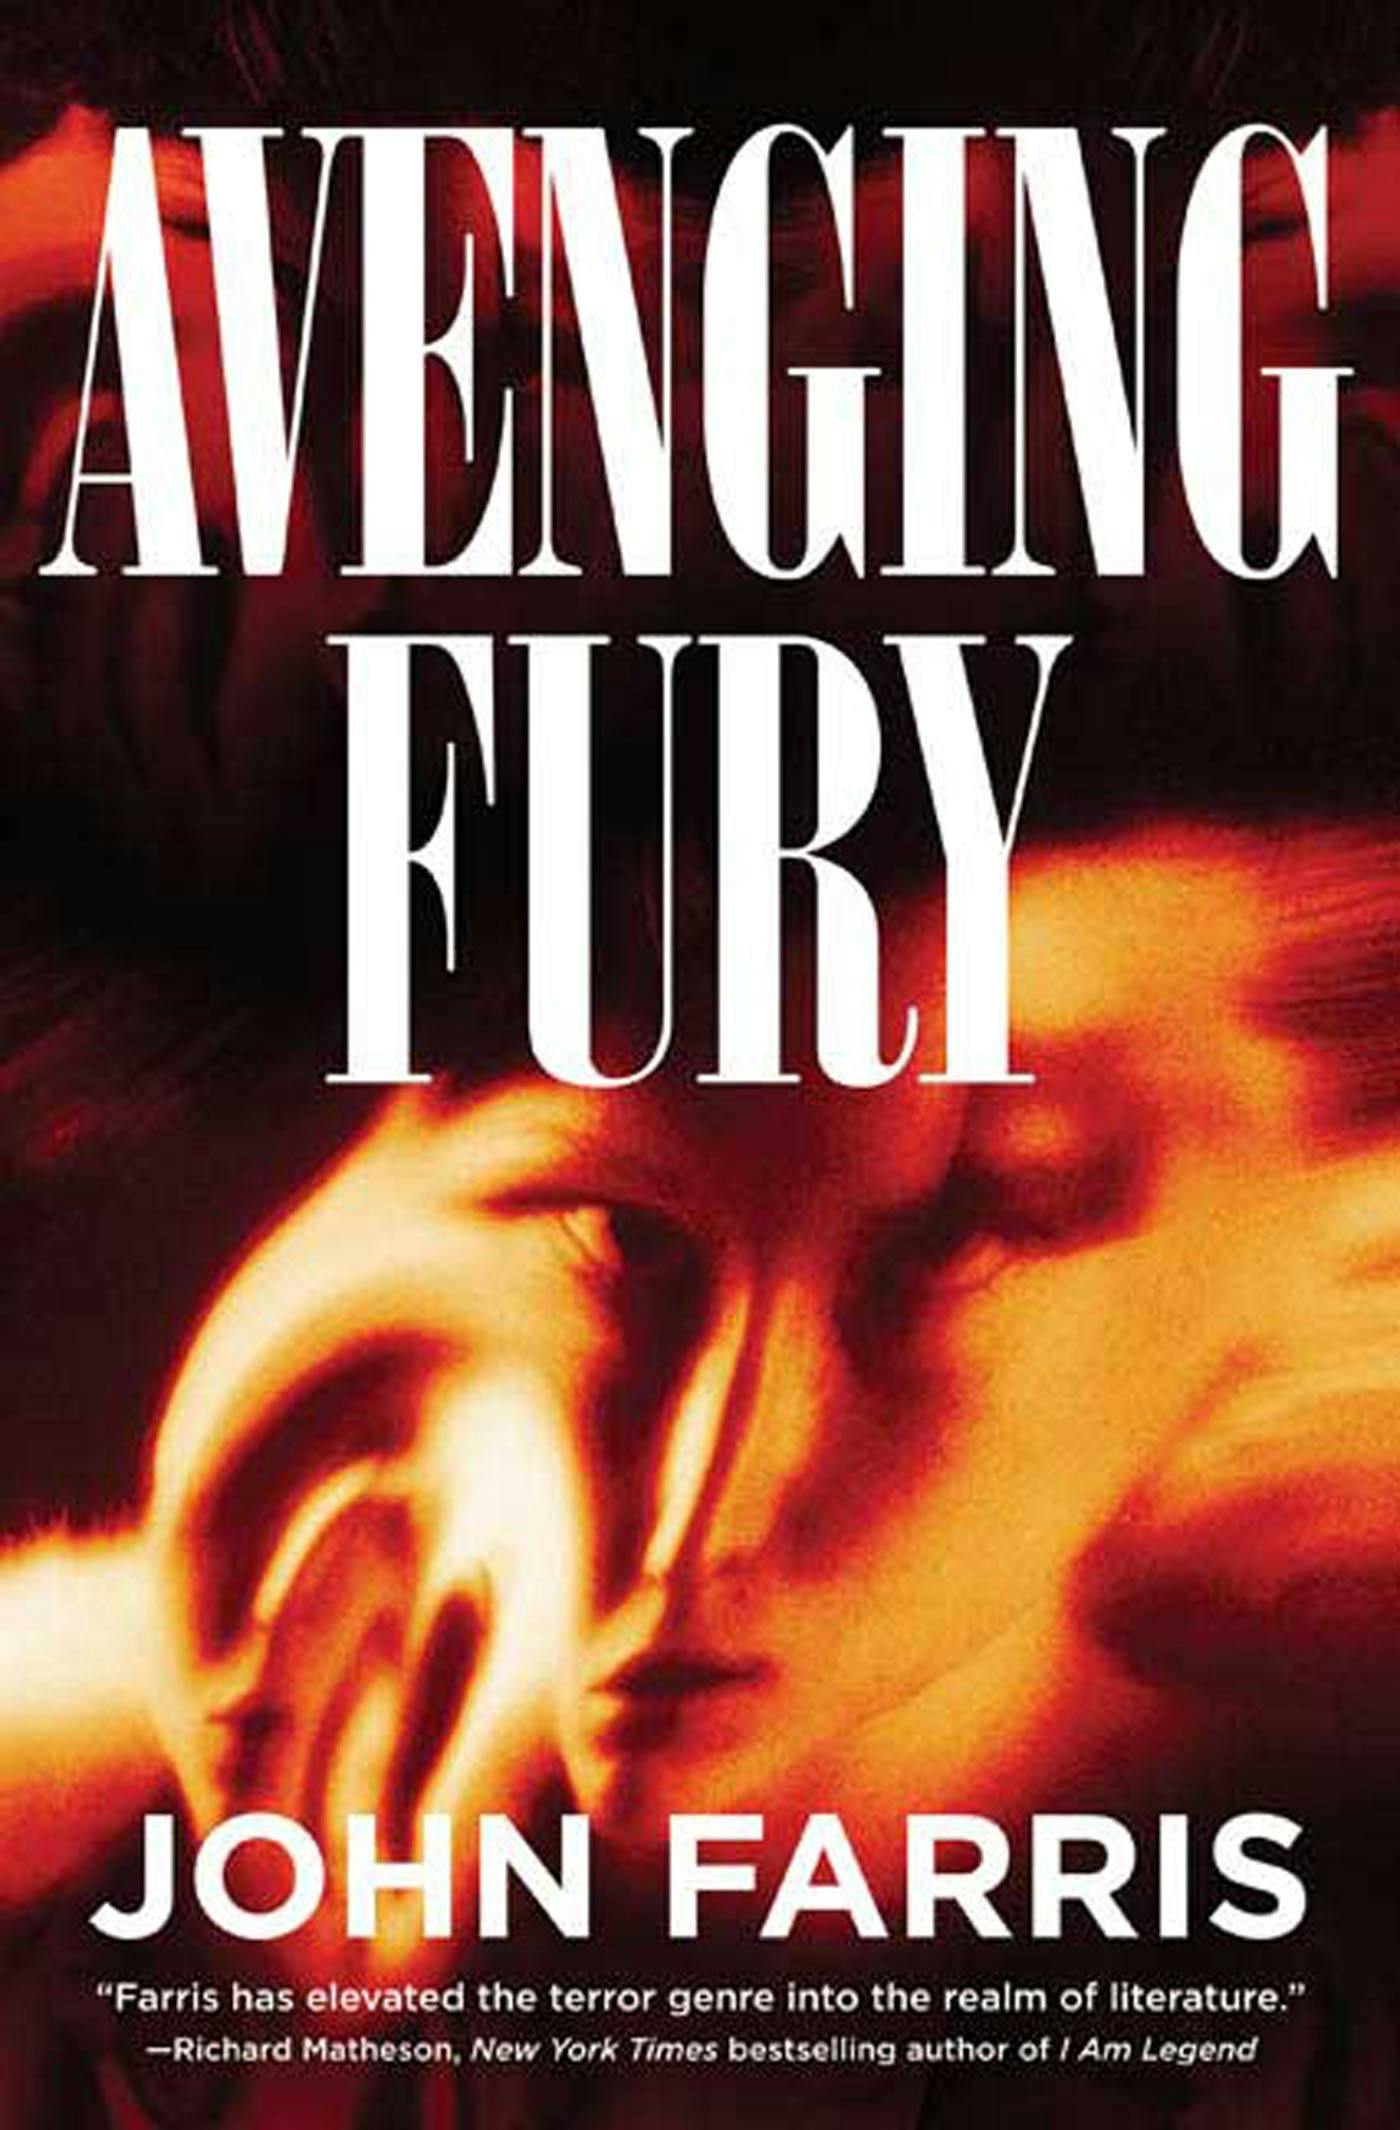 Cover for the book titled as: Avenging Fury